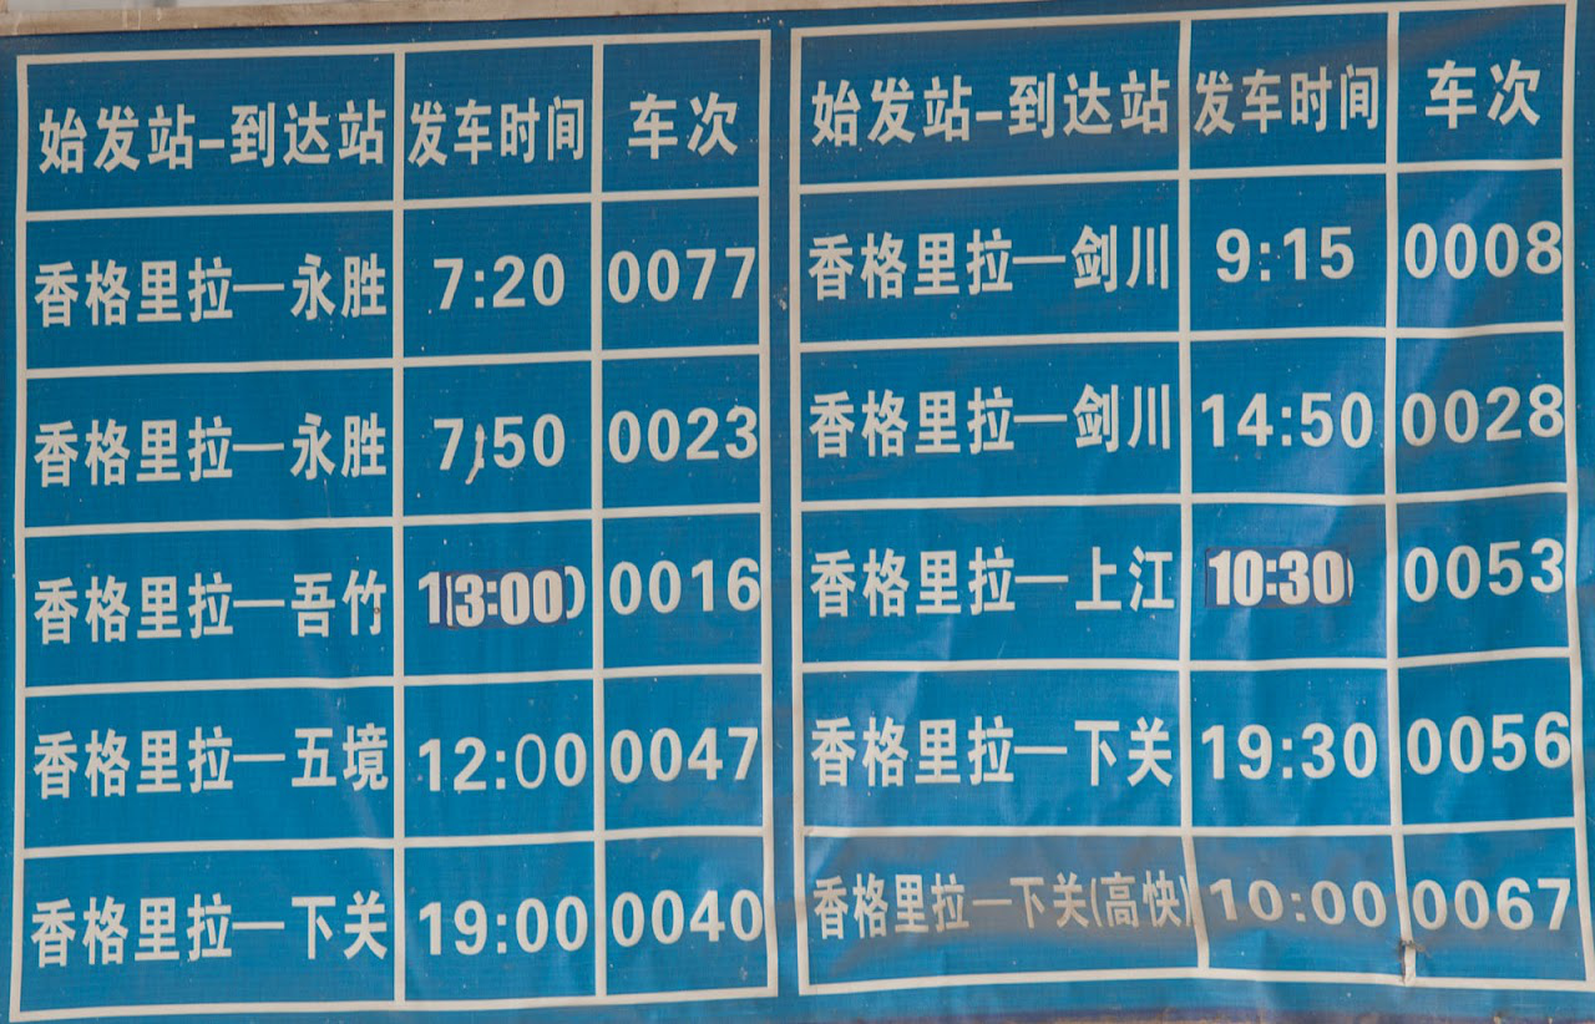 Picture: Xianggelila's big bus-station has services to Kunming, Lijiang, Deqin, Weixi as well as smaller destinations. There are also connections to Sichuan and Tibet. 